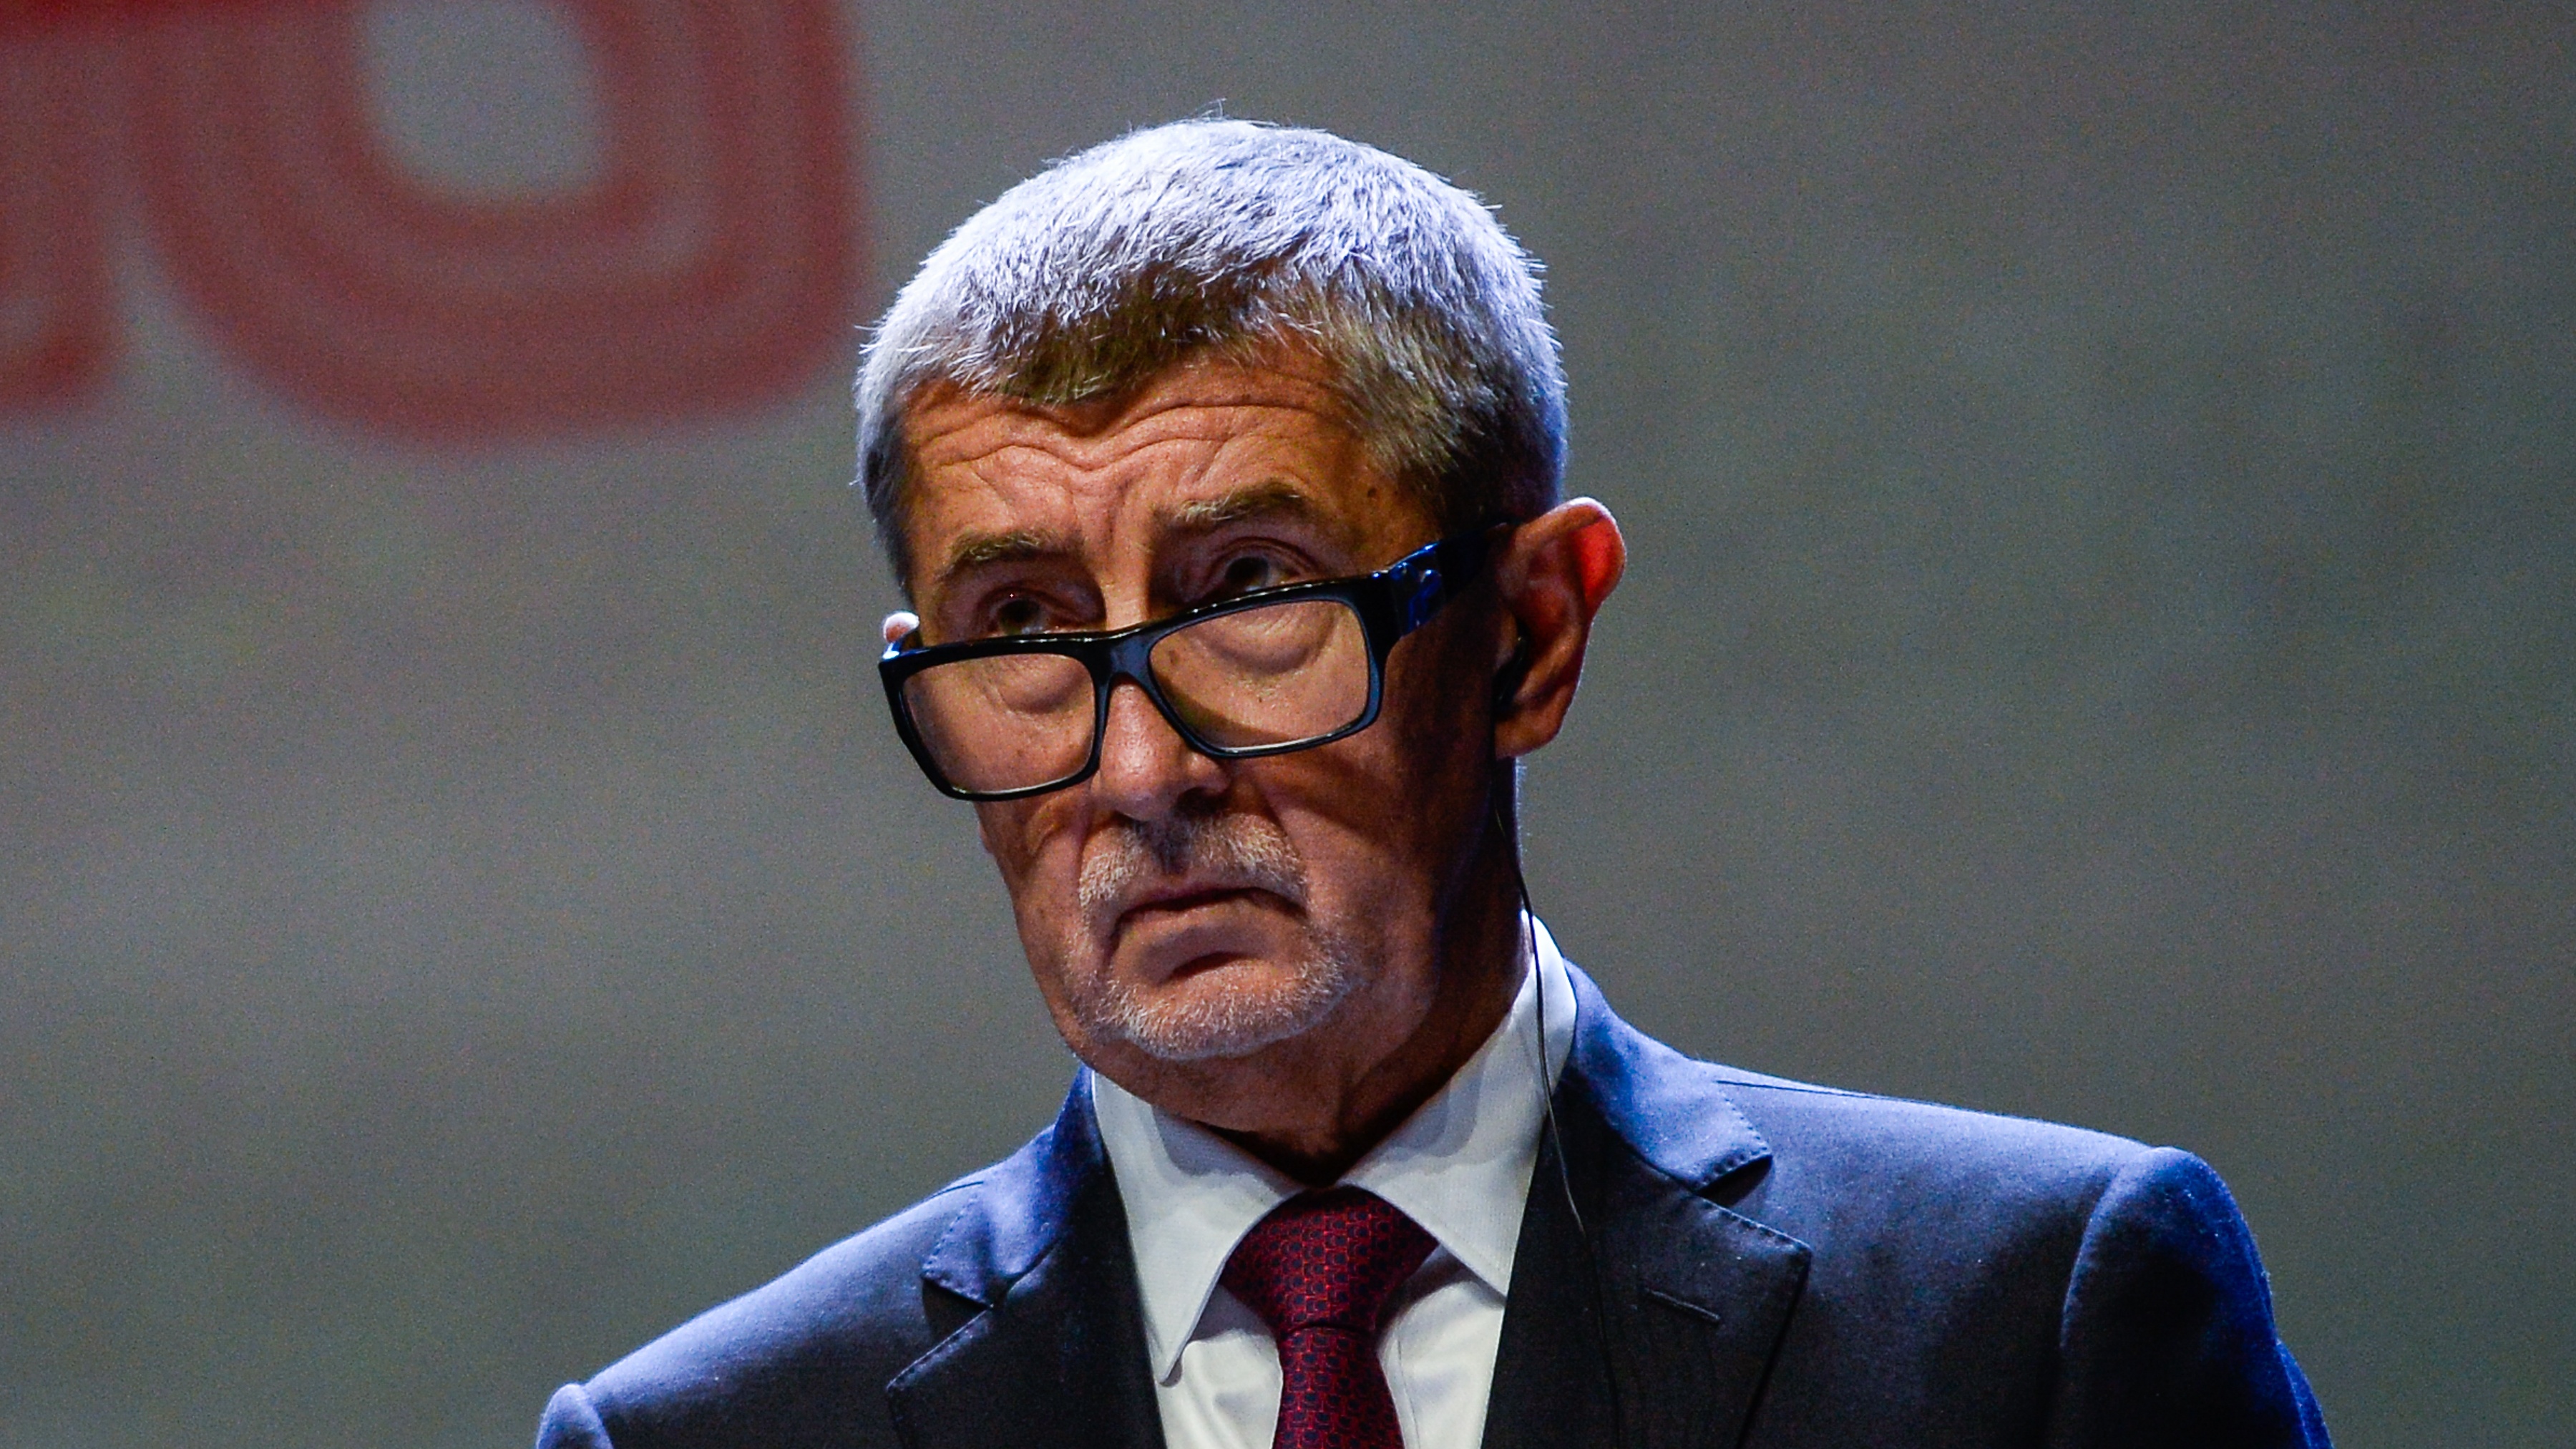 Czech Prime Minister Andrej Babis features in the massive financial data leak